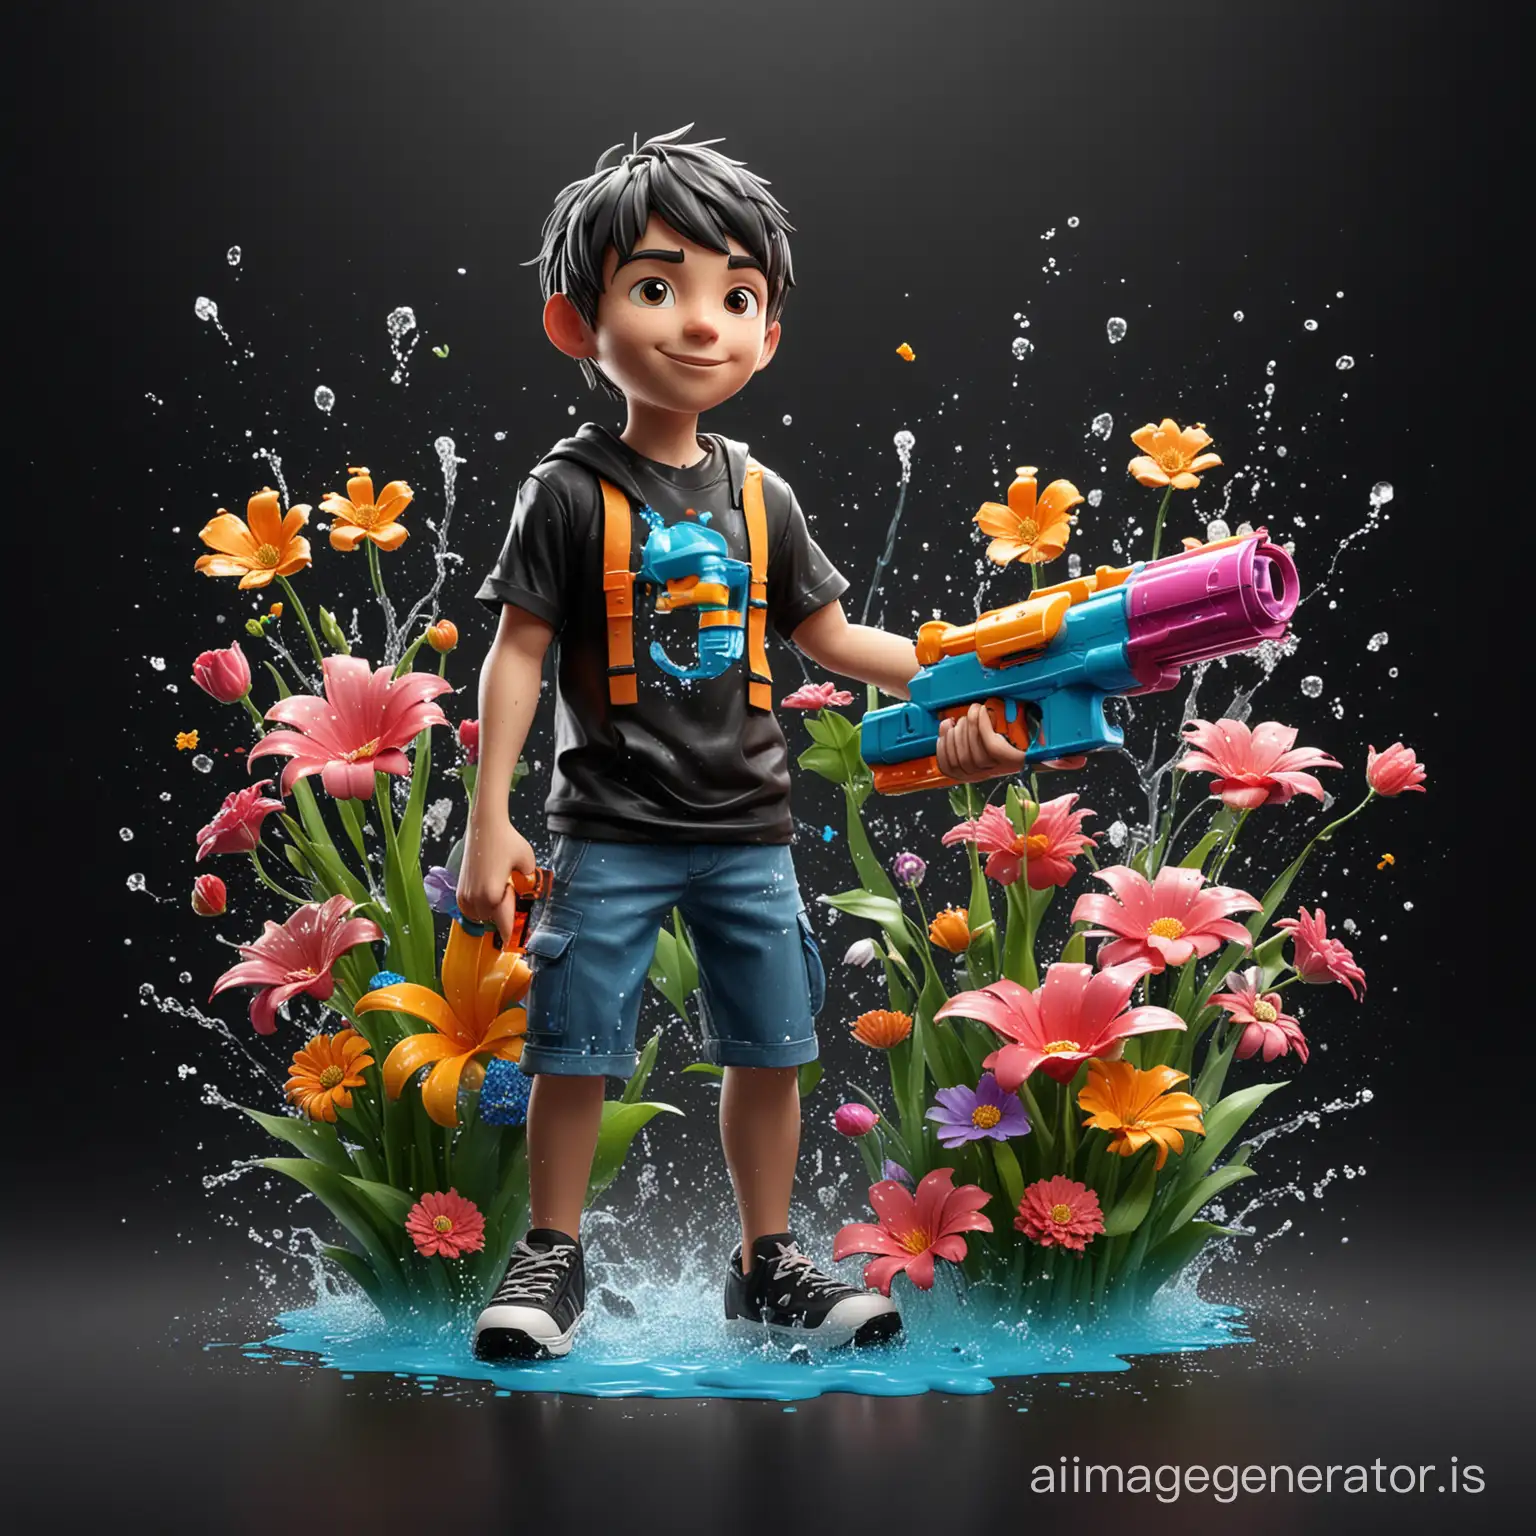 Boy-with-Water-Gun-Surrounded-by-Flowers-and-Water-Splashes-on-Black-Background